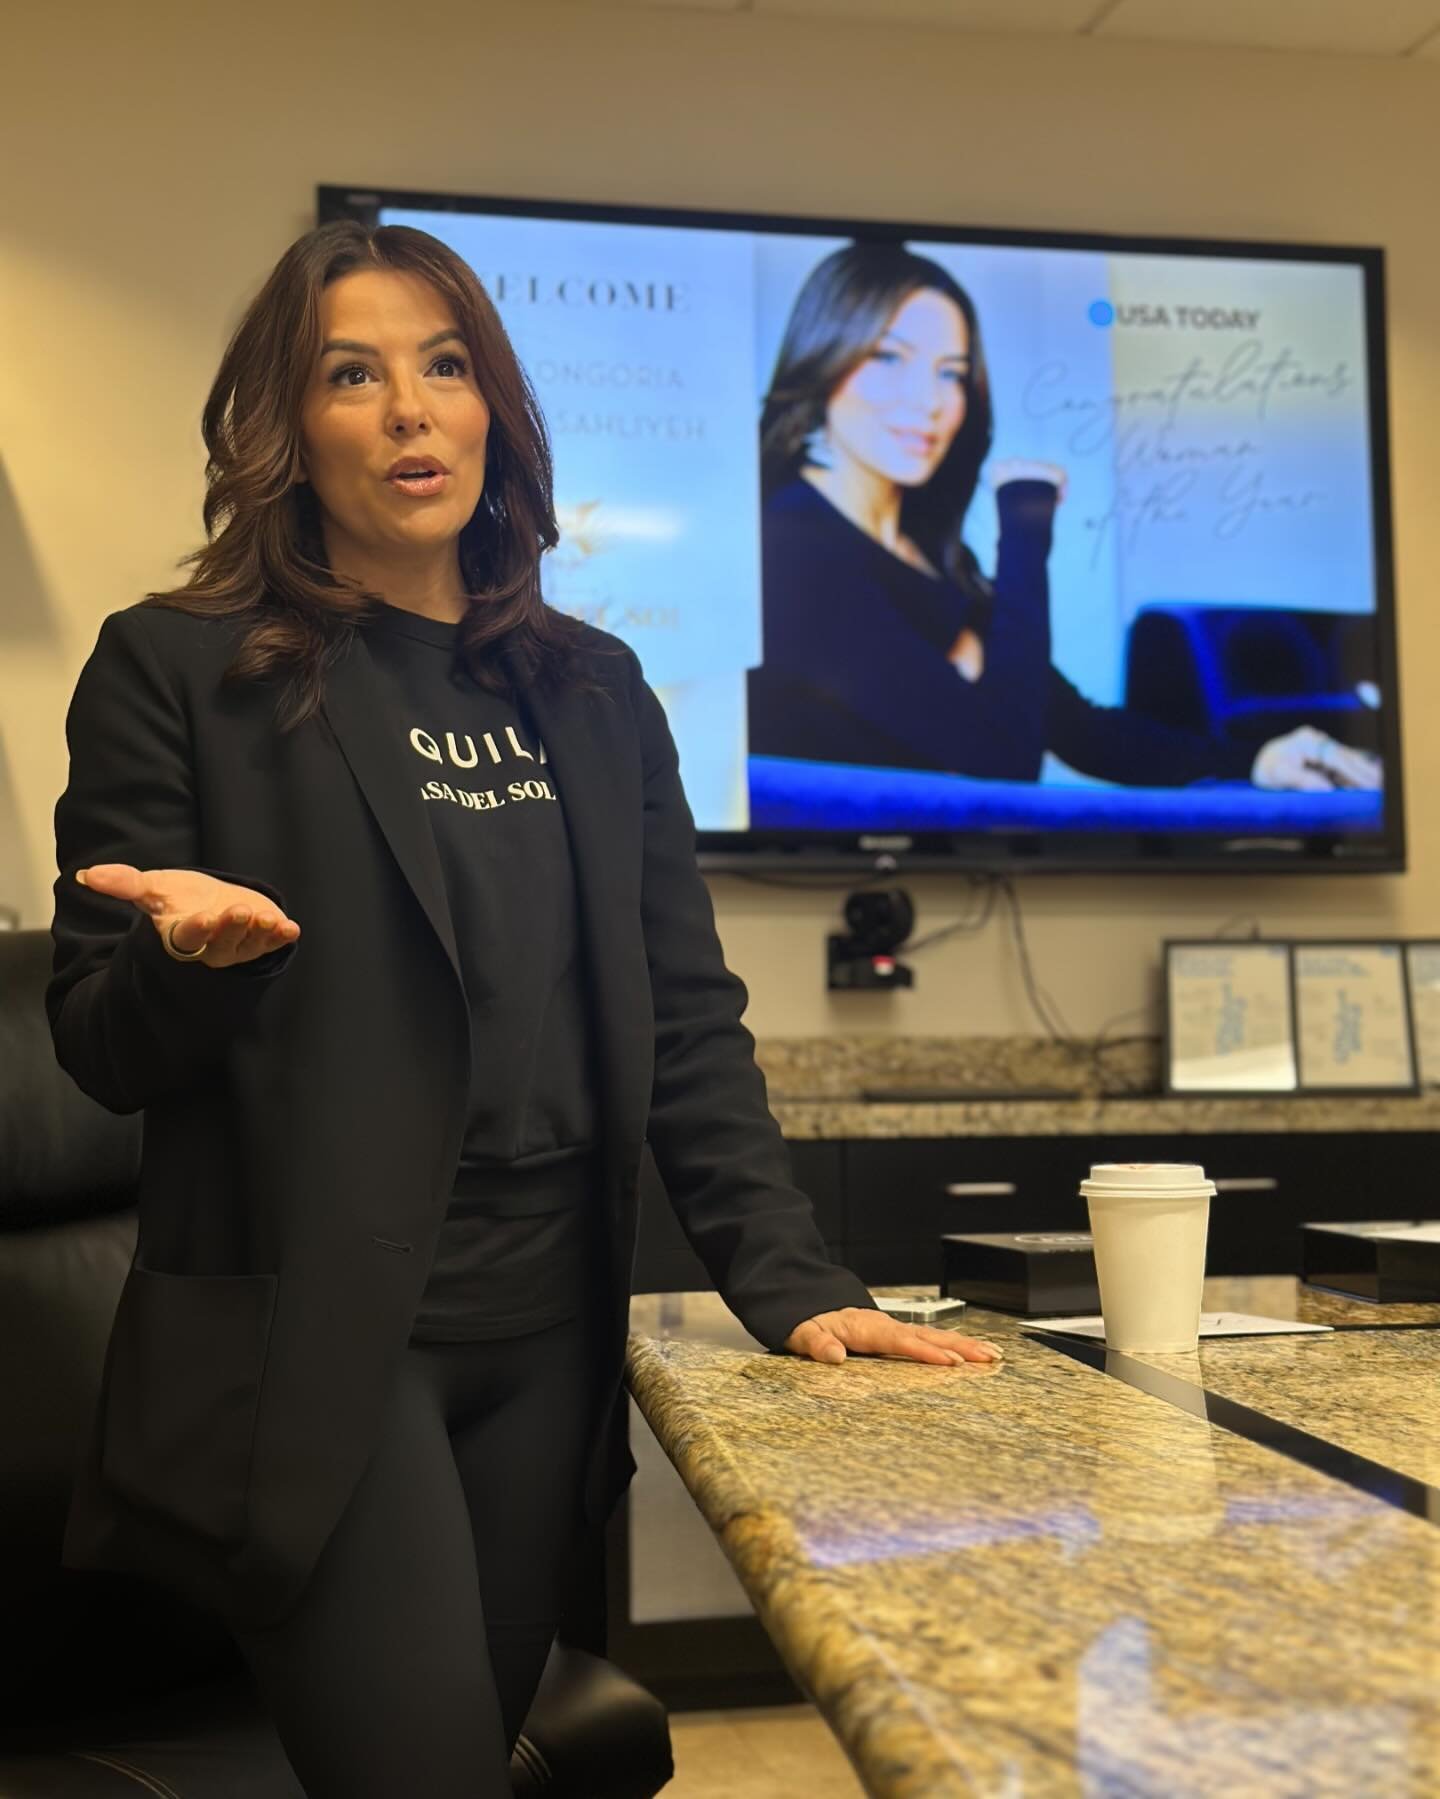 What a wonderful visit from our dear friend and &lsquo;Woman of the Year,&rsquo; Eva Longoria, bringing the spirit of Casa Del Sol Tequila to our office today! 🌞 #TeamPHCP #casadelsoltequila